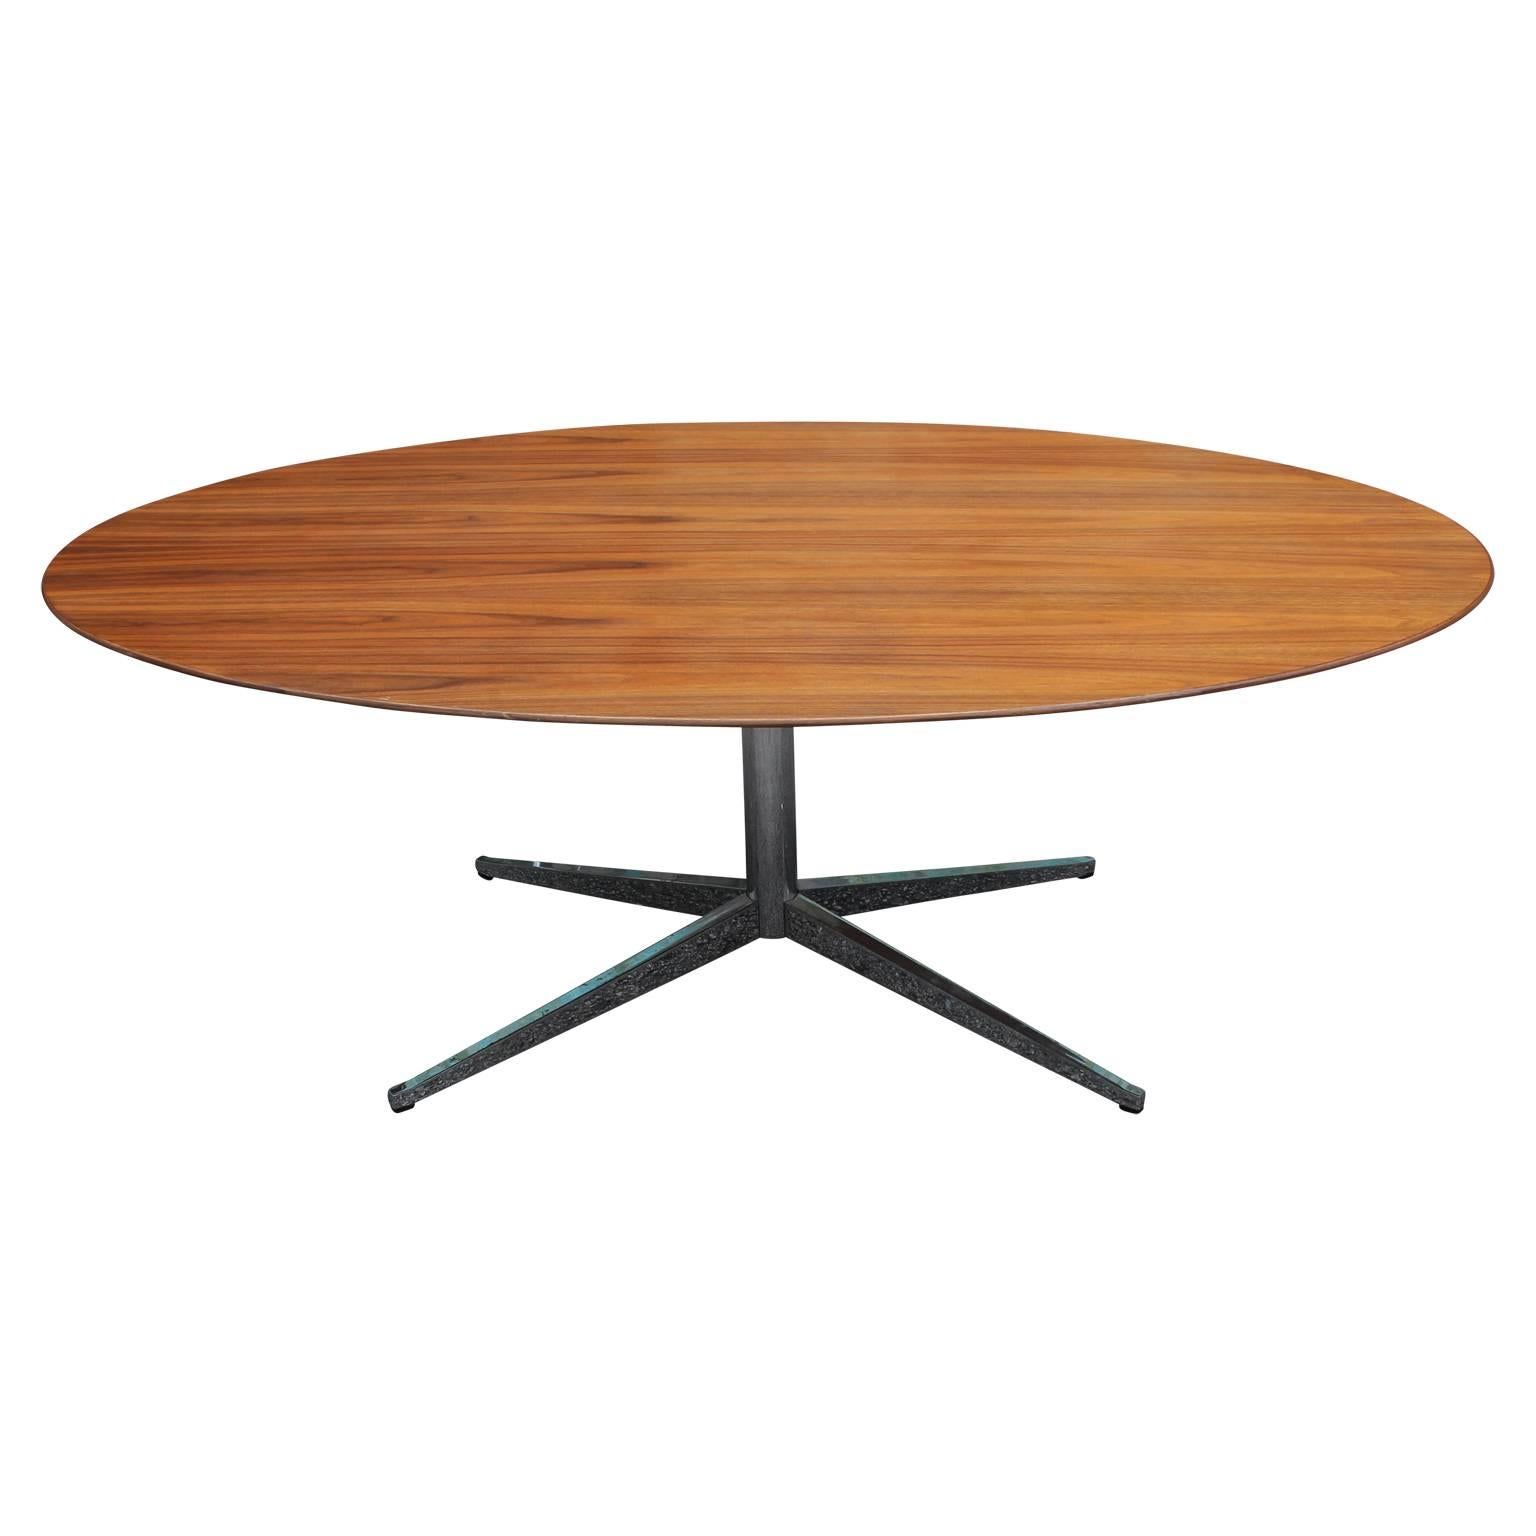 Mid-20th Century Modern Florence Knoll for Knoll Walnut and Chrome Oval Dining Table